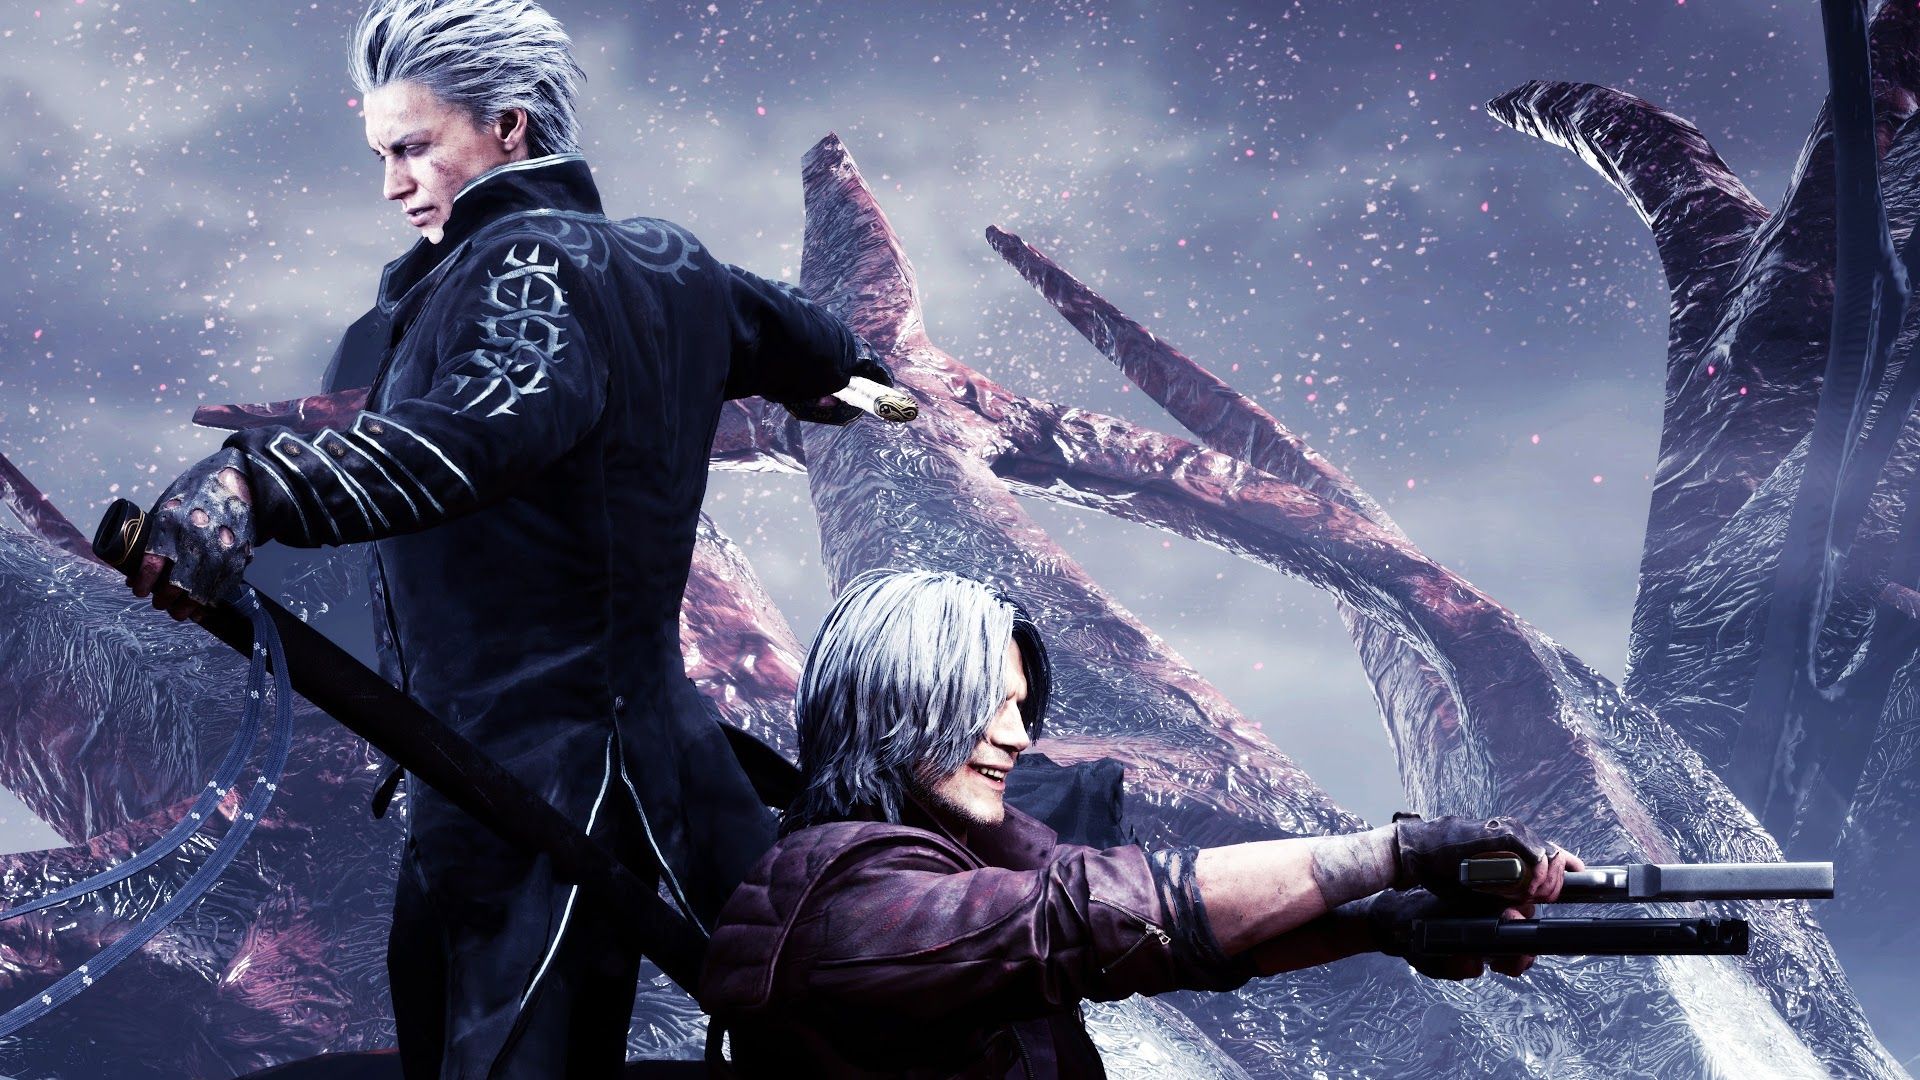 Nero with V  Dante  Devil May Cry 5 Video Game 4K wallpaper download